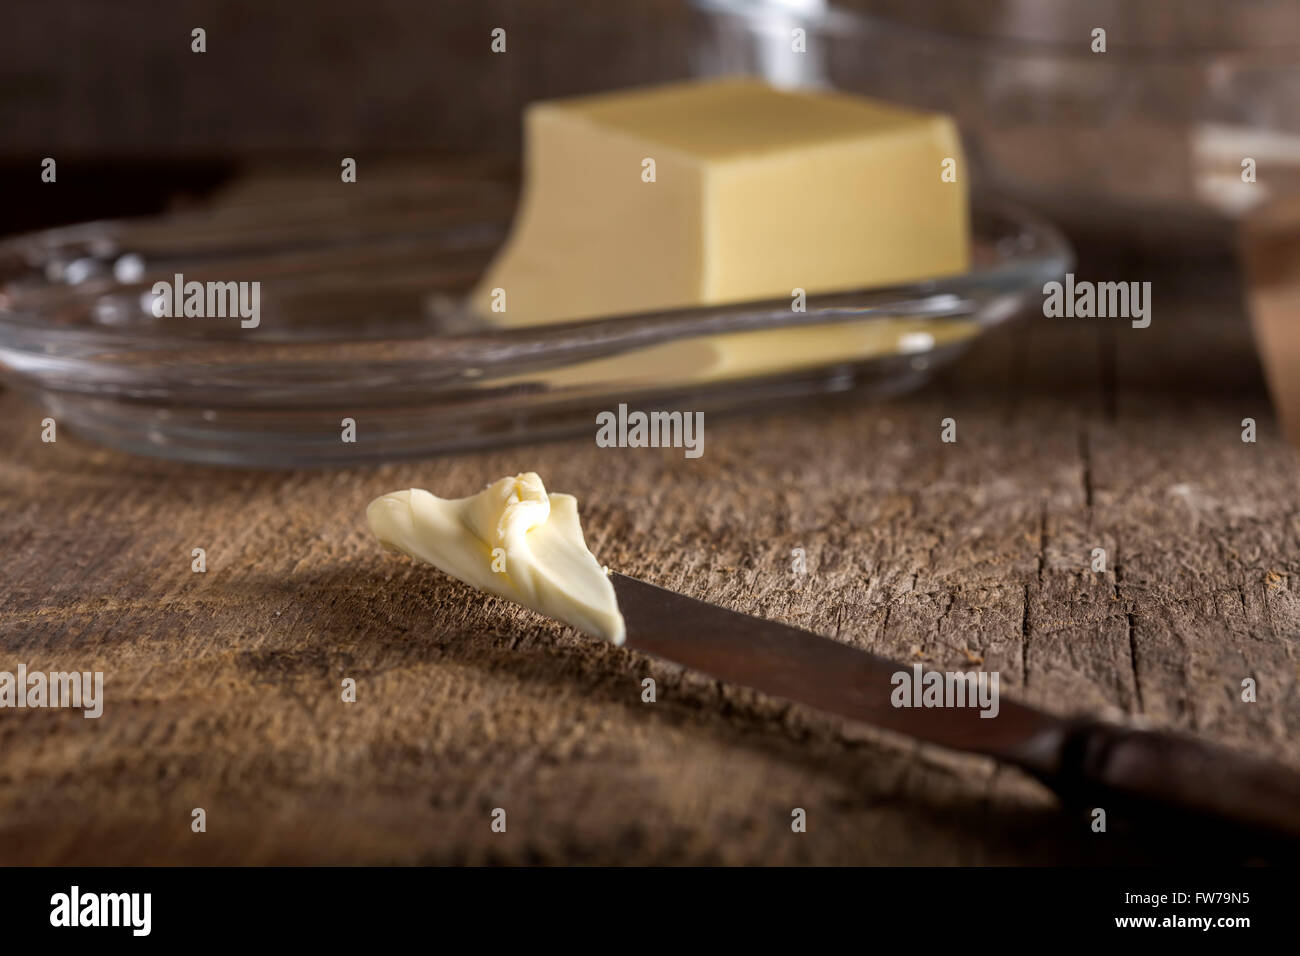 Knife with butter and butter dish in background Stock Photo